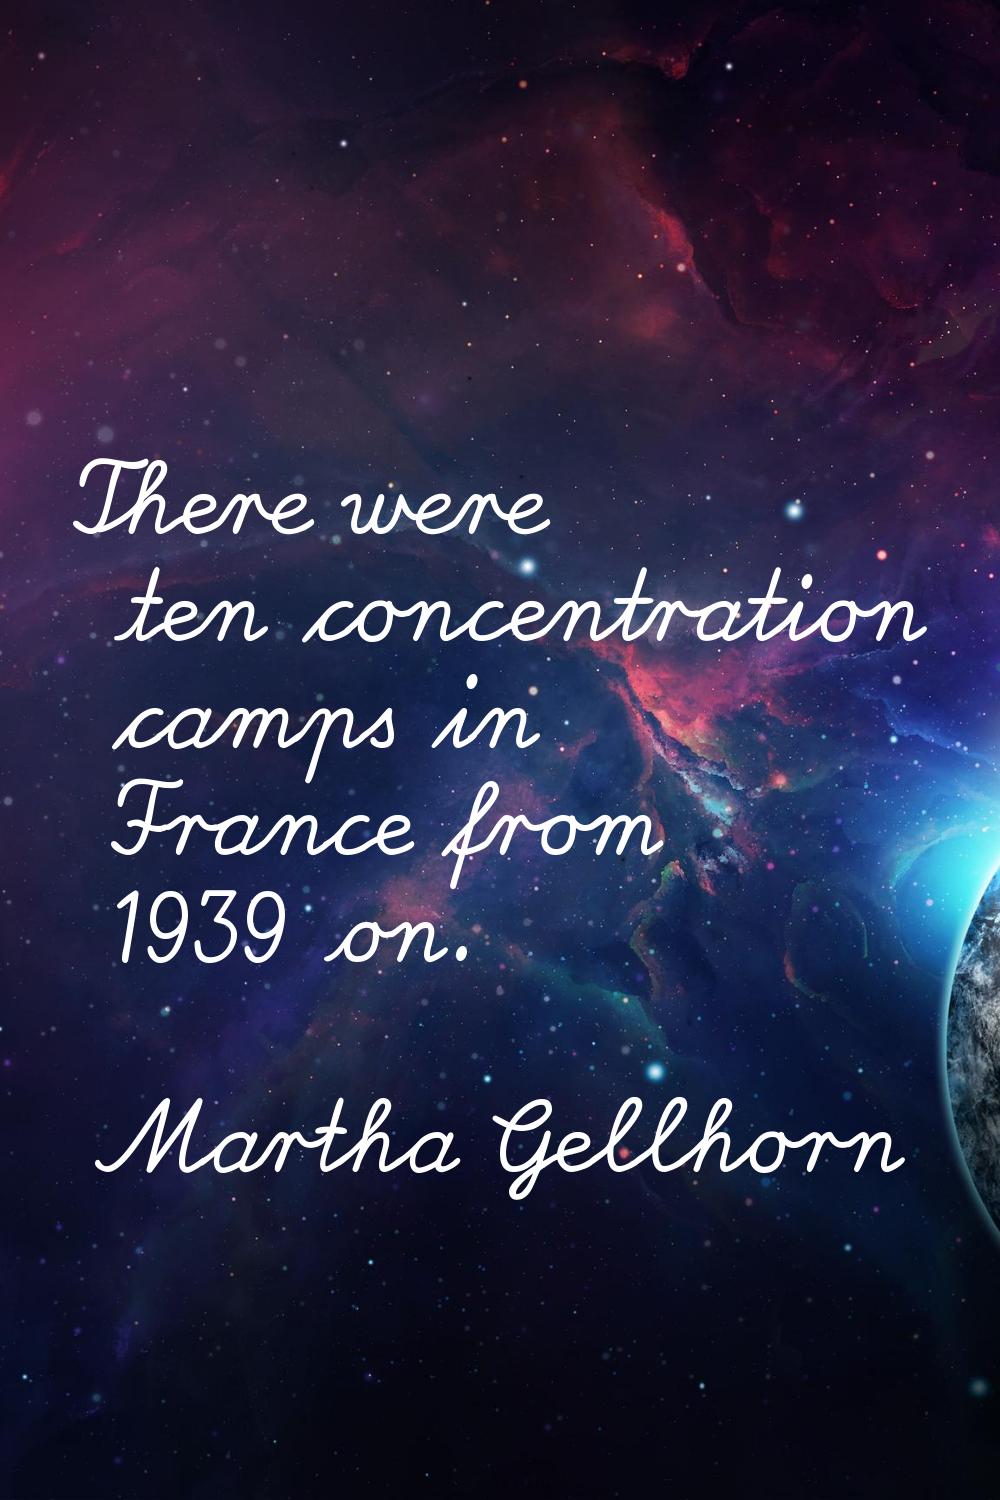 There were ten concentration camps in France from 1939 on.